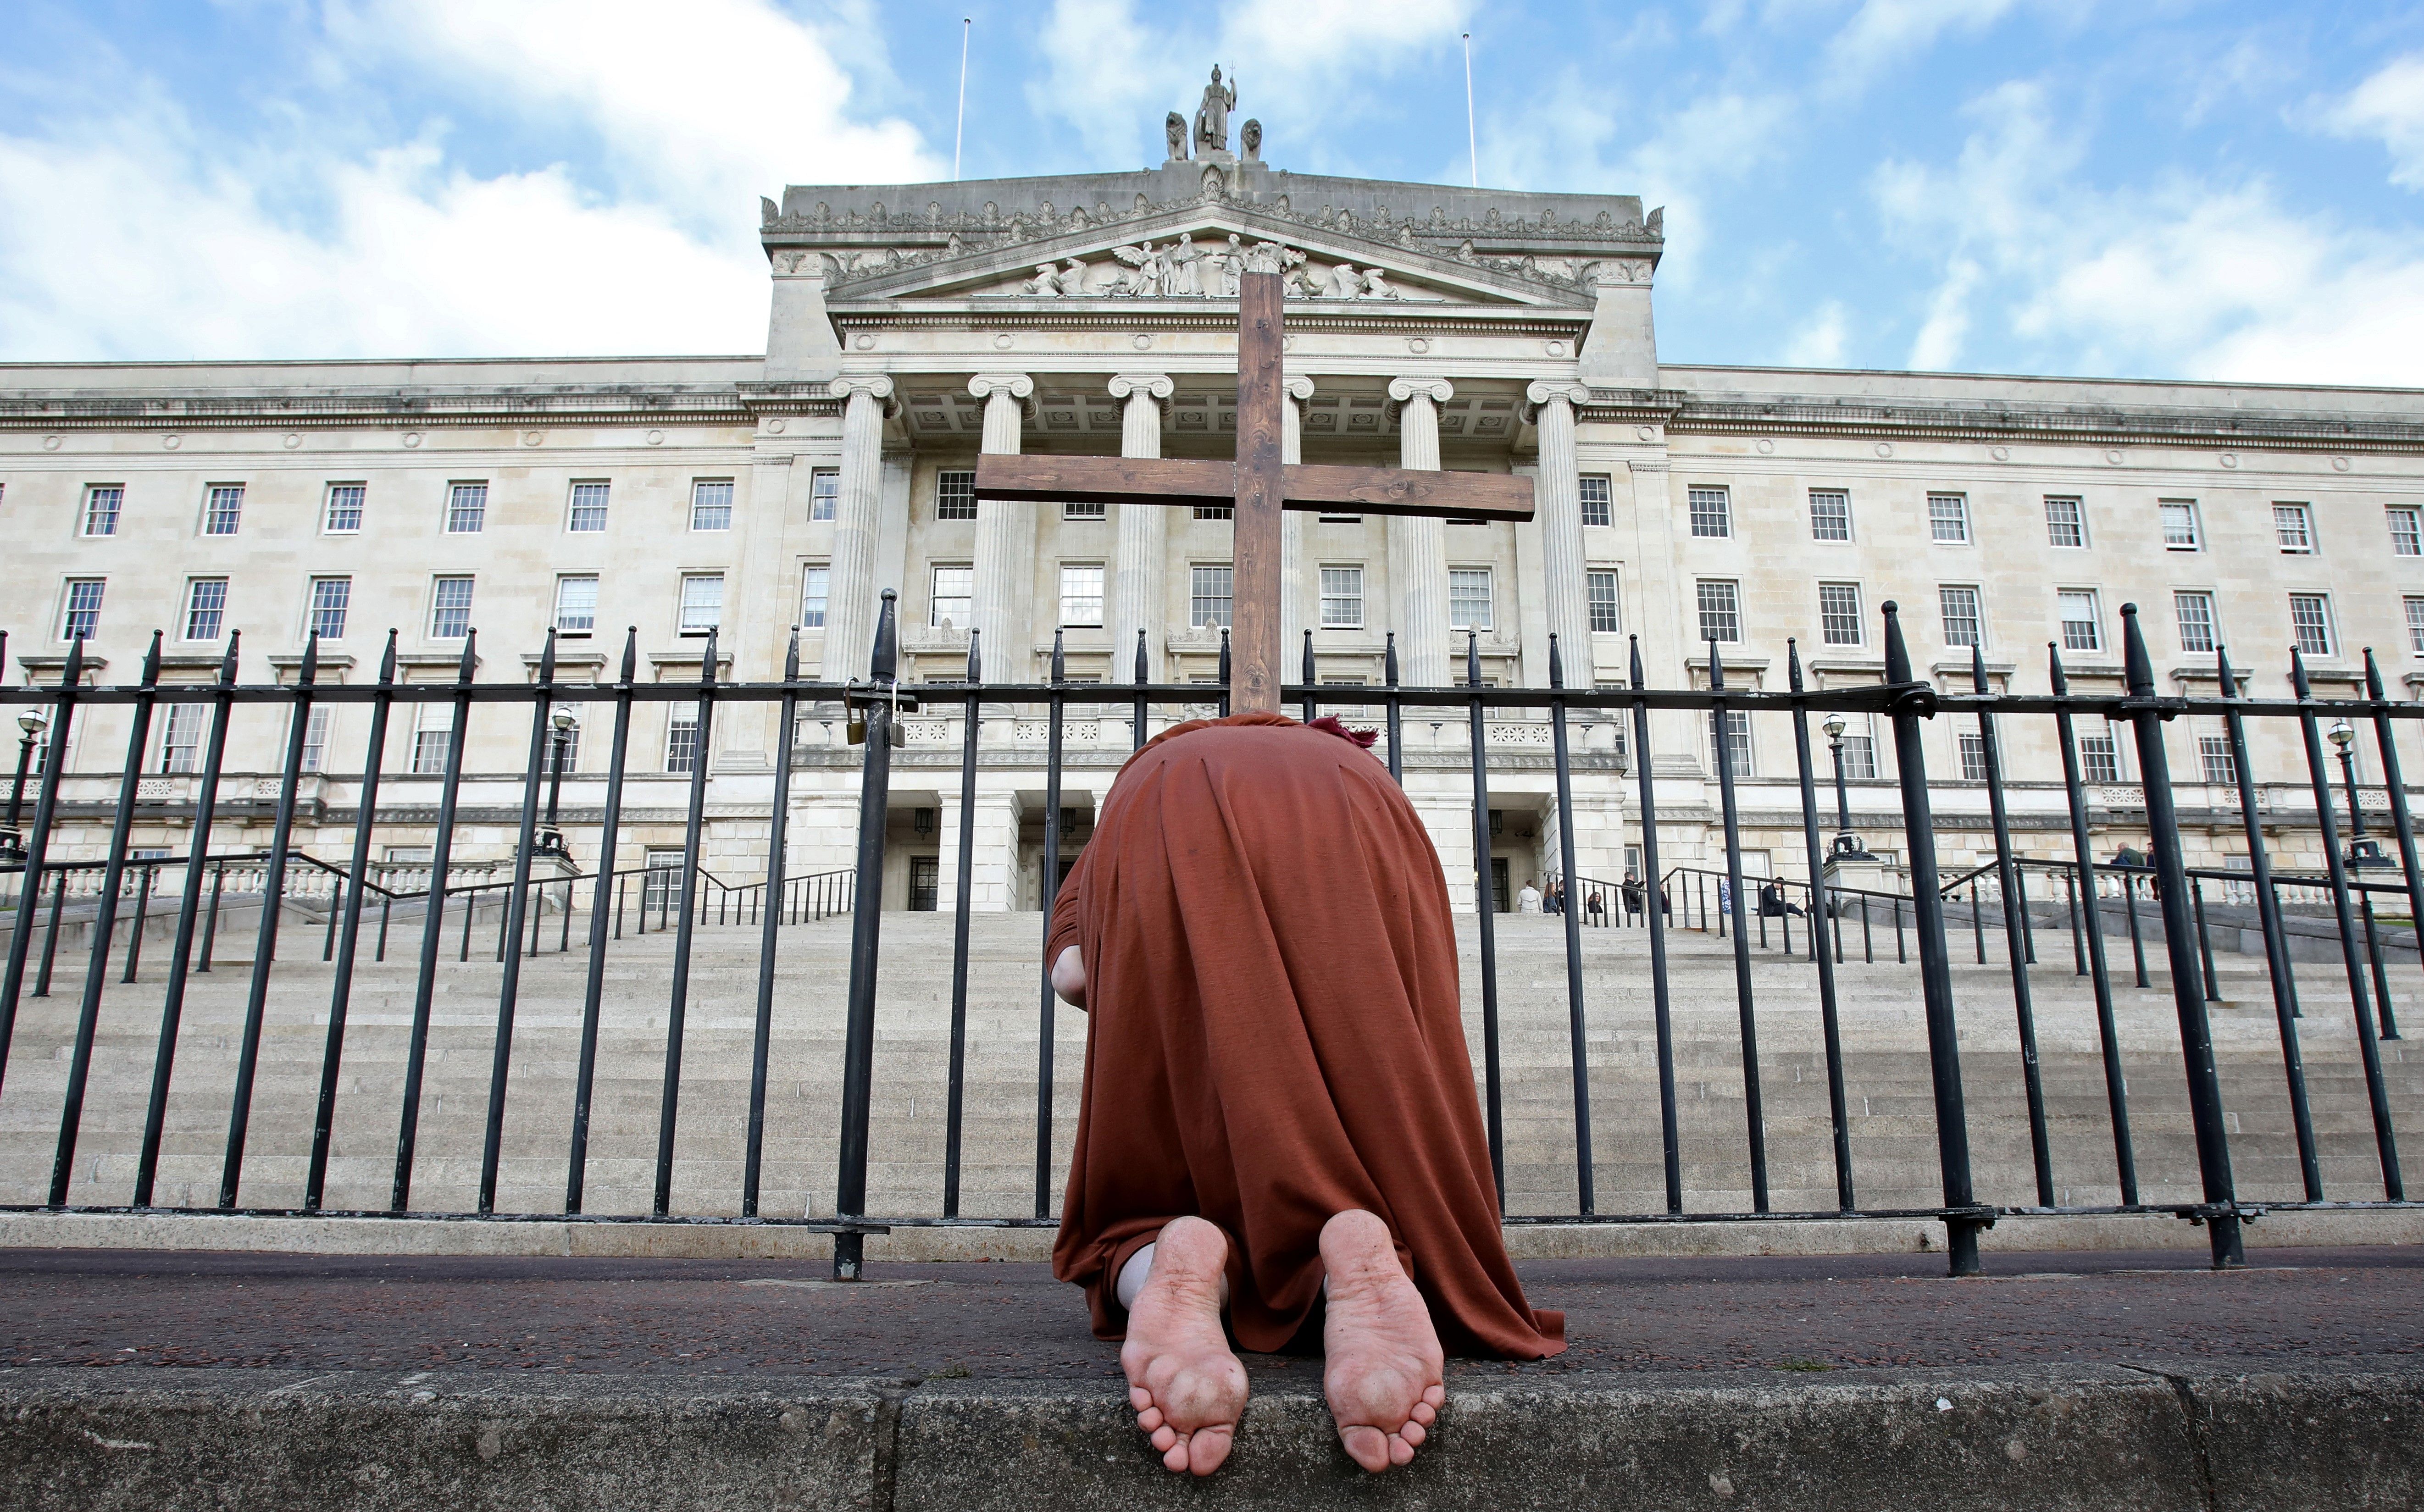 An anti-abortion activist poses for a photograph whilst demonstrating outside of Parliament Buildings, the seat of the Northern Ireland Assembly, on the Stormont Estate in Belfast, Northern Ireland, on October 21, 2019, as a number of lawmakers returned to attend a special sitting. - A group of Northern Irish lawmakers returned to their parliament on Monday in a last-minute protest at the liberalisation of abortion laws, set to come into force after being decided by London for the suspended Belfast executive. The regional government in Belfast collapsed in January 2017 after a scandal over a renewable heating scheme split the power-sharing executive, amid a breakdown in trust. Abortion is currently illegal in the province, except when the mother's life is in danger. (Photo by PAUL FAITH / AFP) (Photo by PAUL FAITH/AFP via Getty Images)